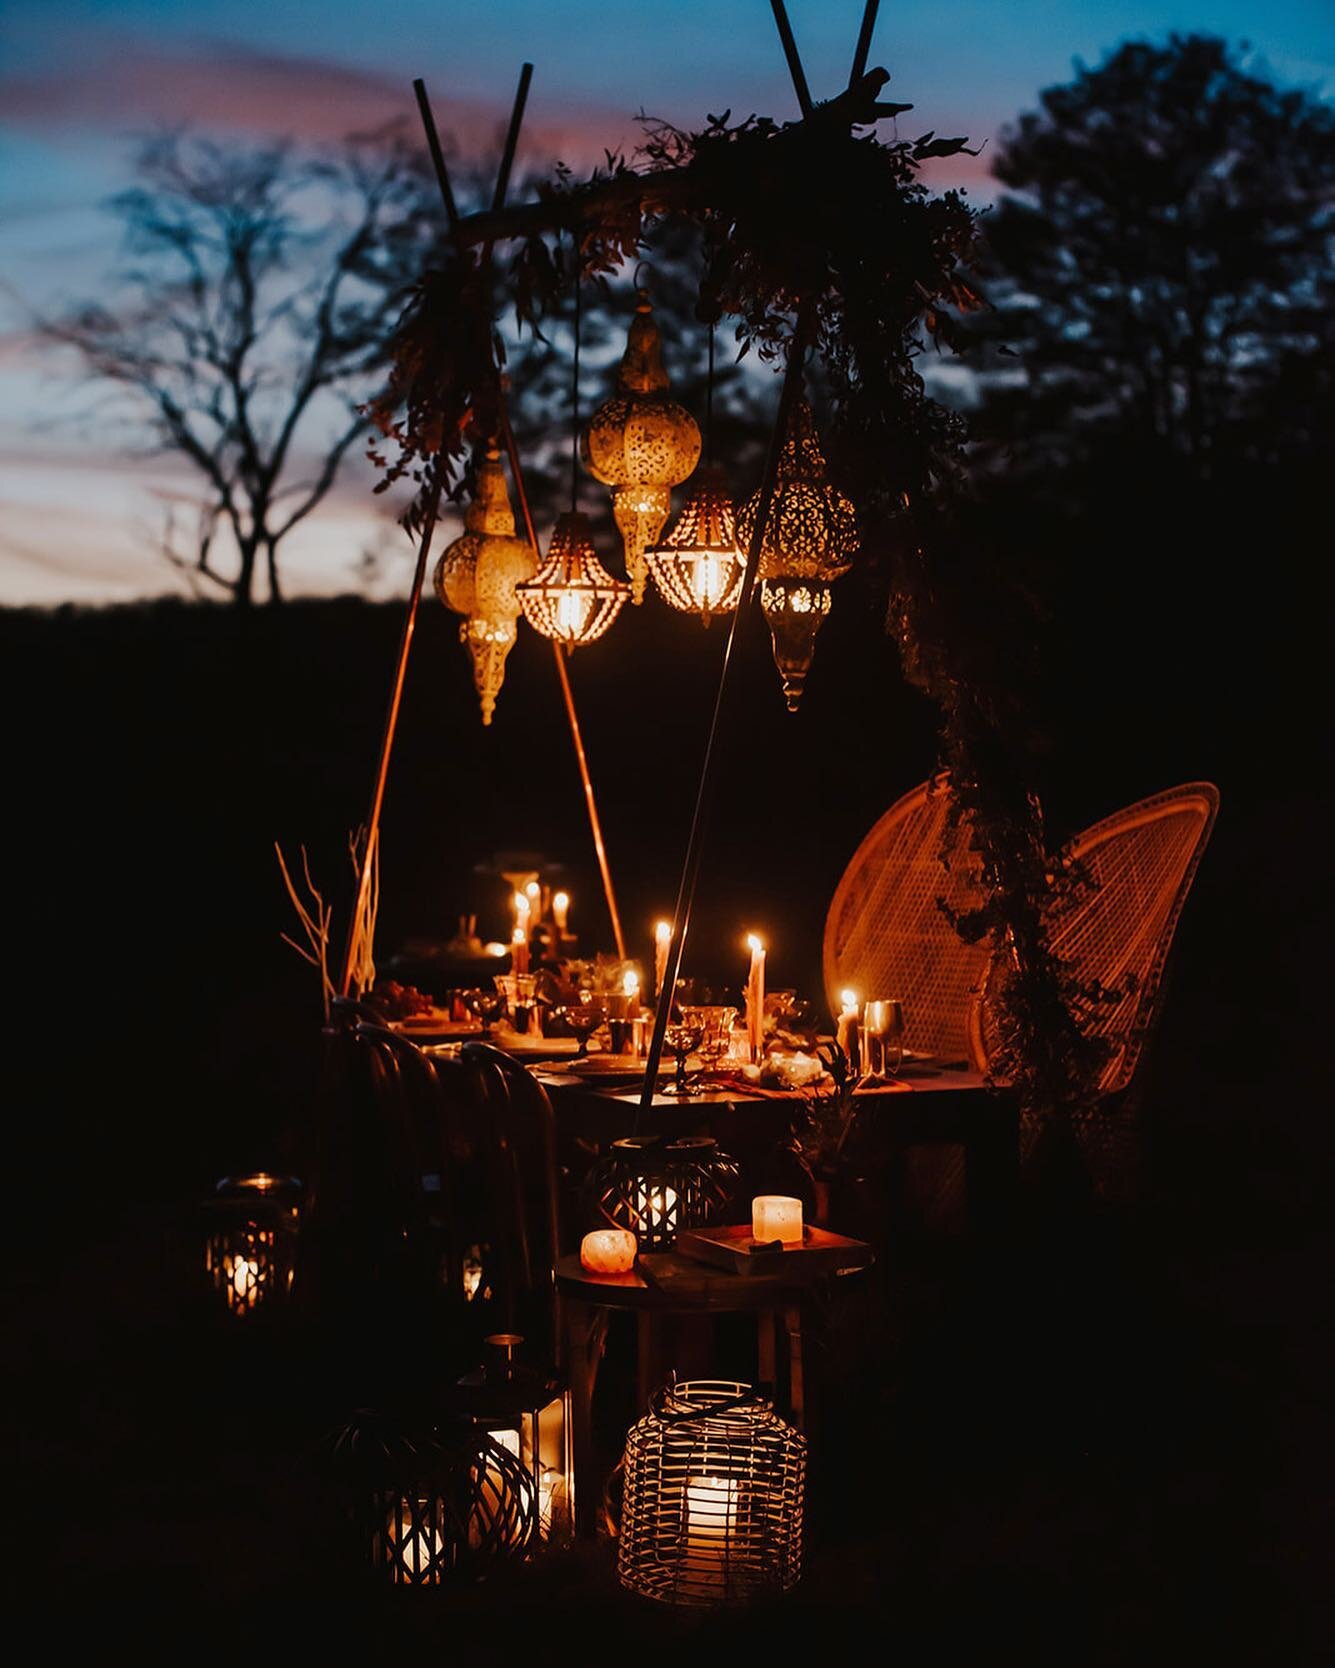 Alluring midnight gathering in the forest of dreams. // #ellaandcompanyweddings // 📷: @thegrays.co #canaanvalley #wvweddingsmag #thomaswv